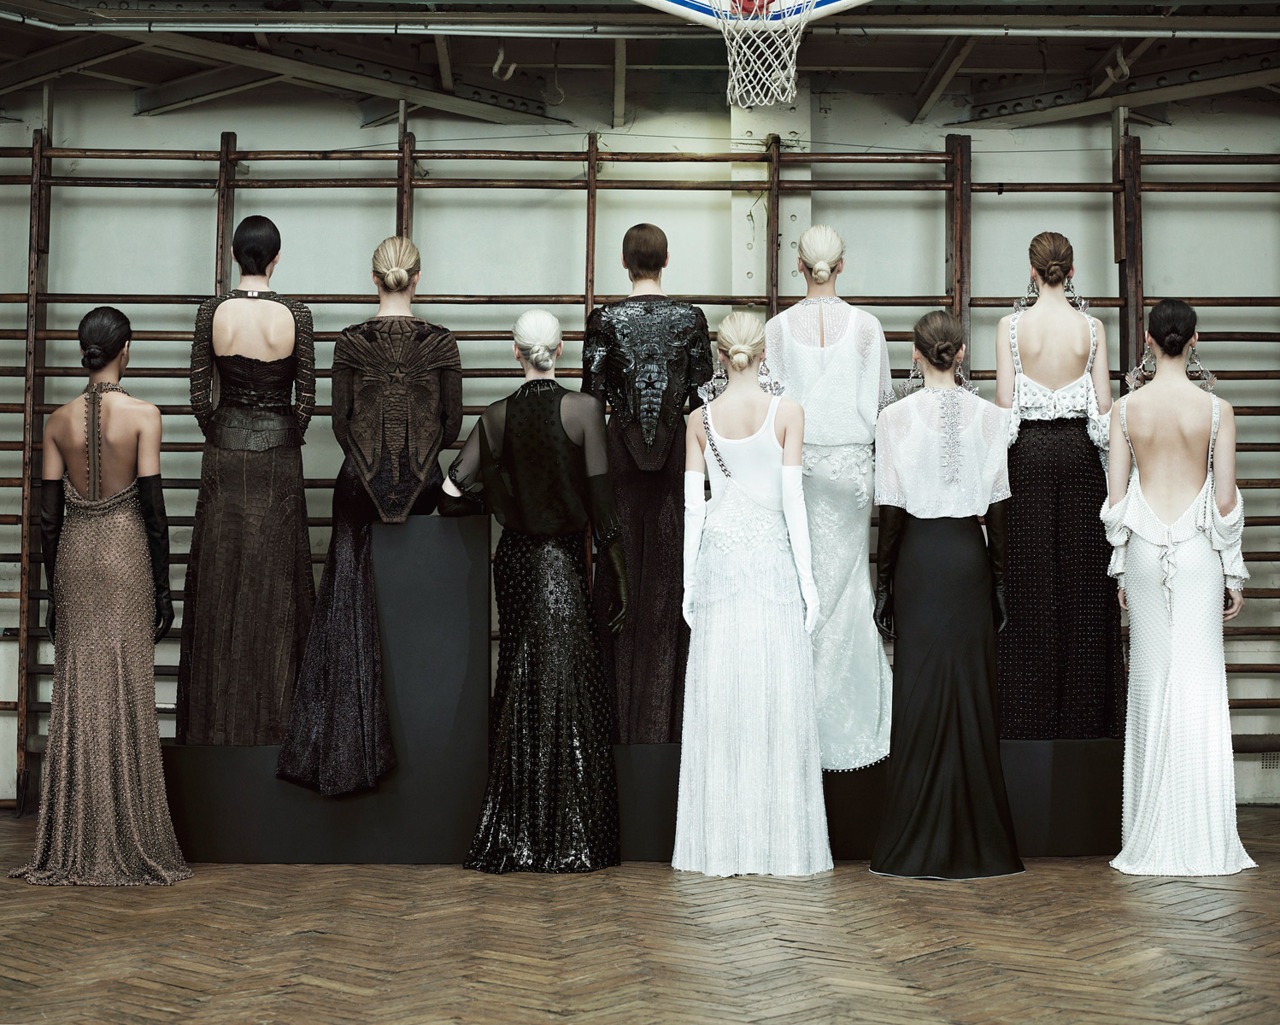 Givenchy.
Haute Couture 2012